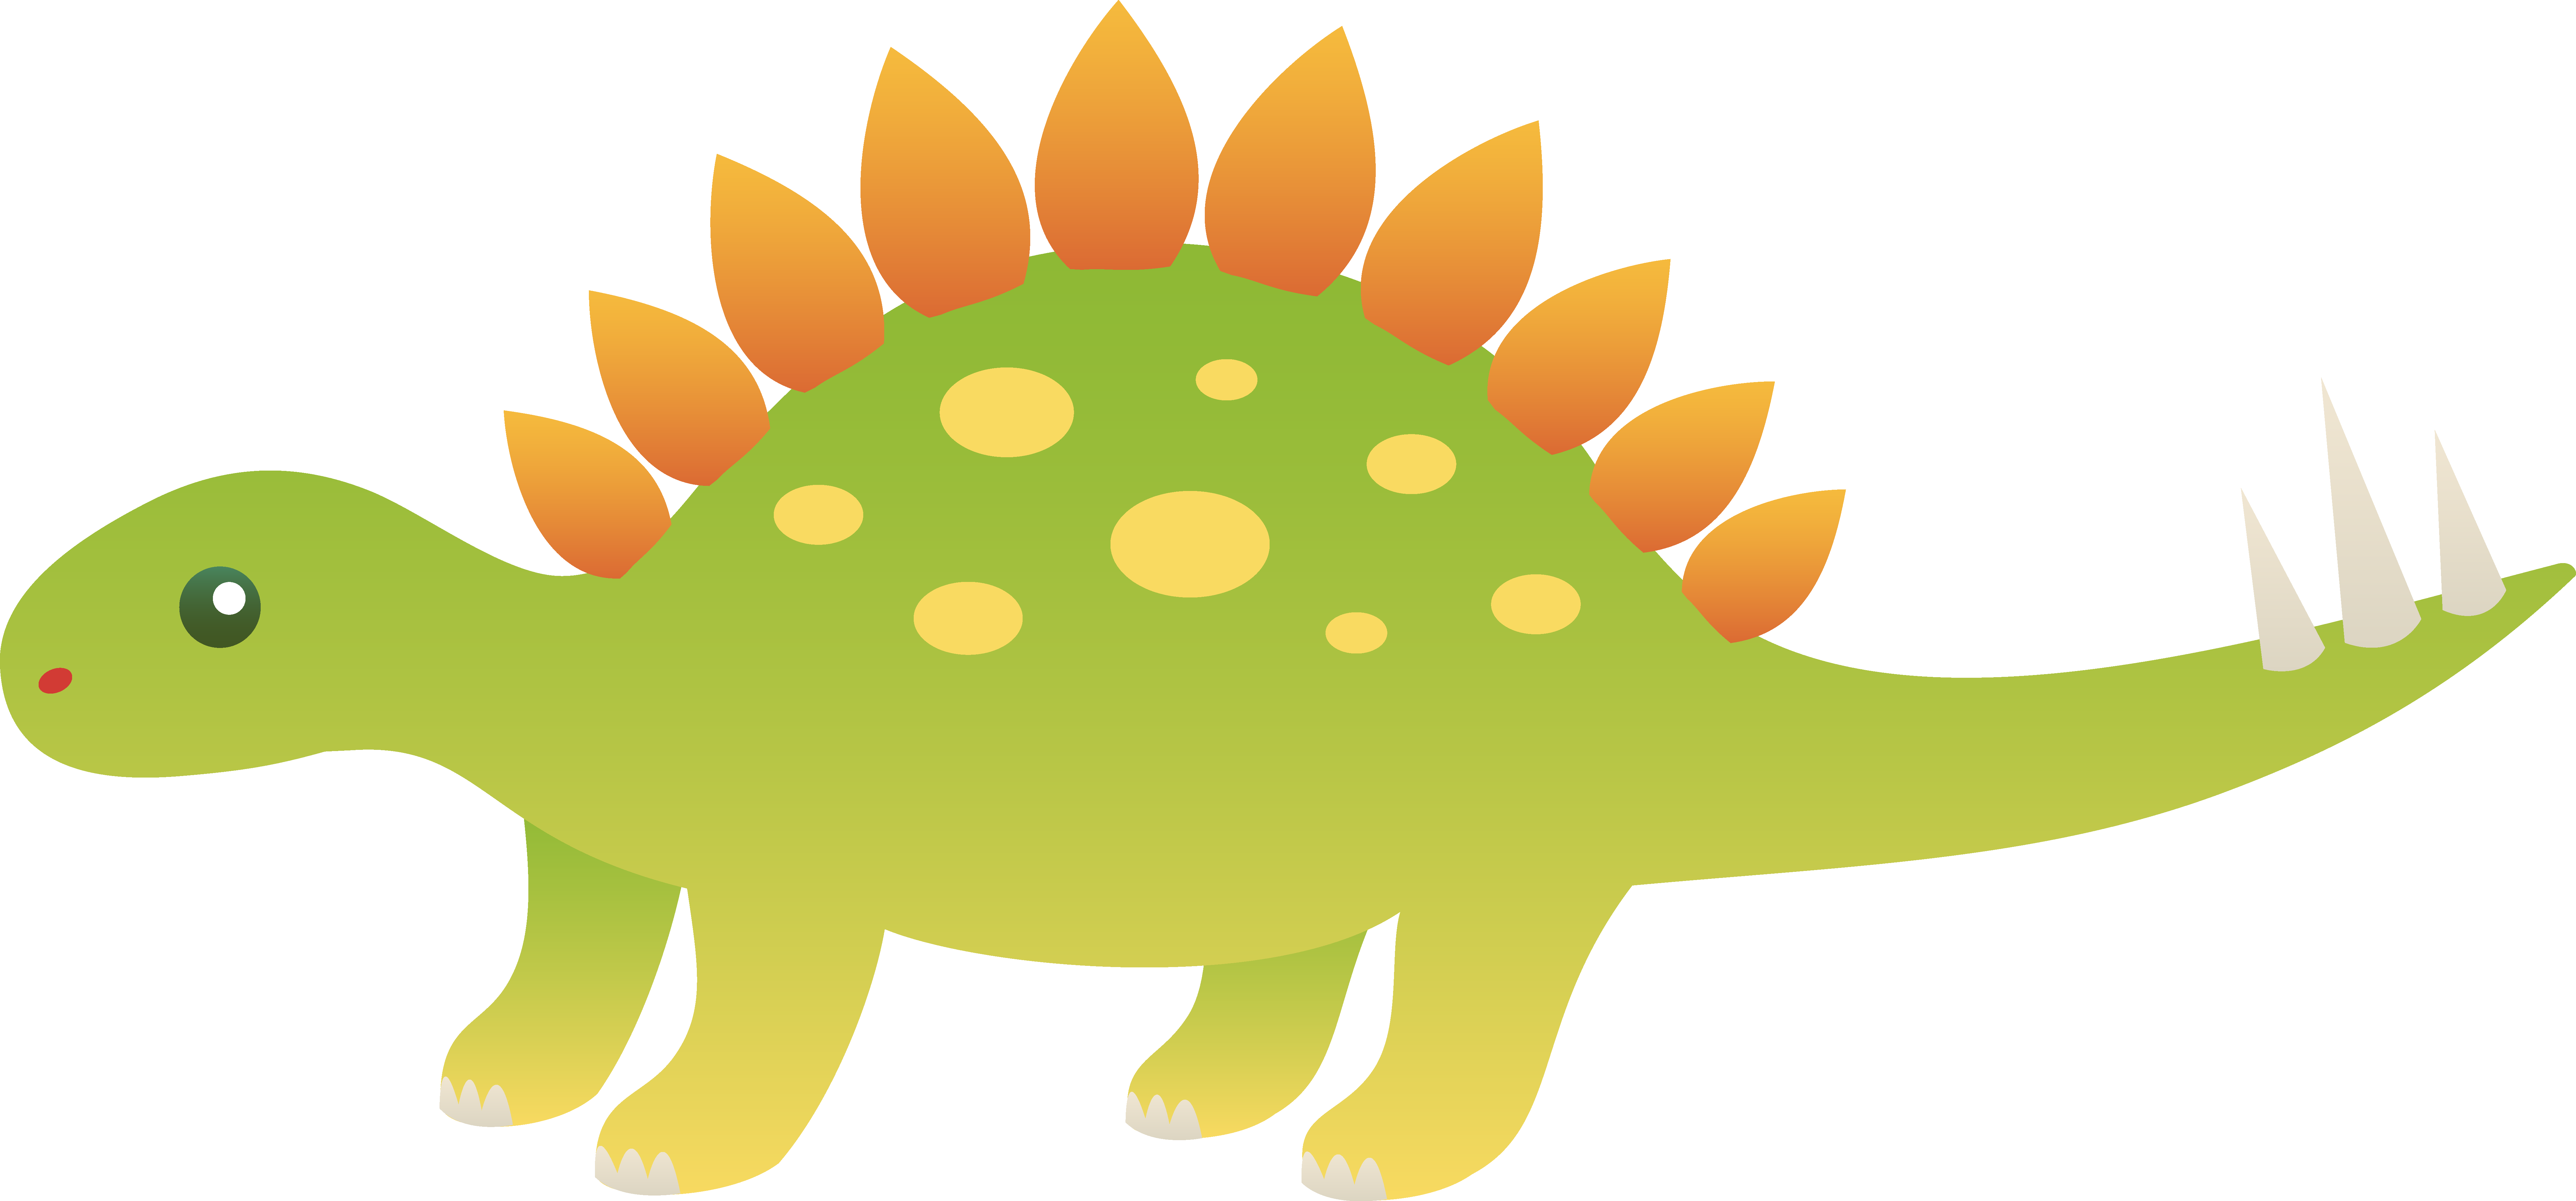 Free dinosaur clipart the cliparts 2